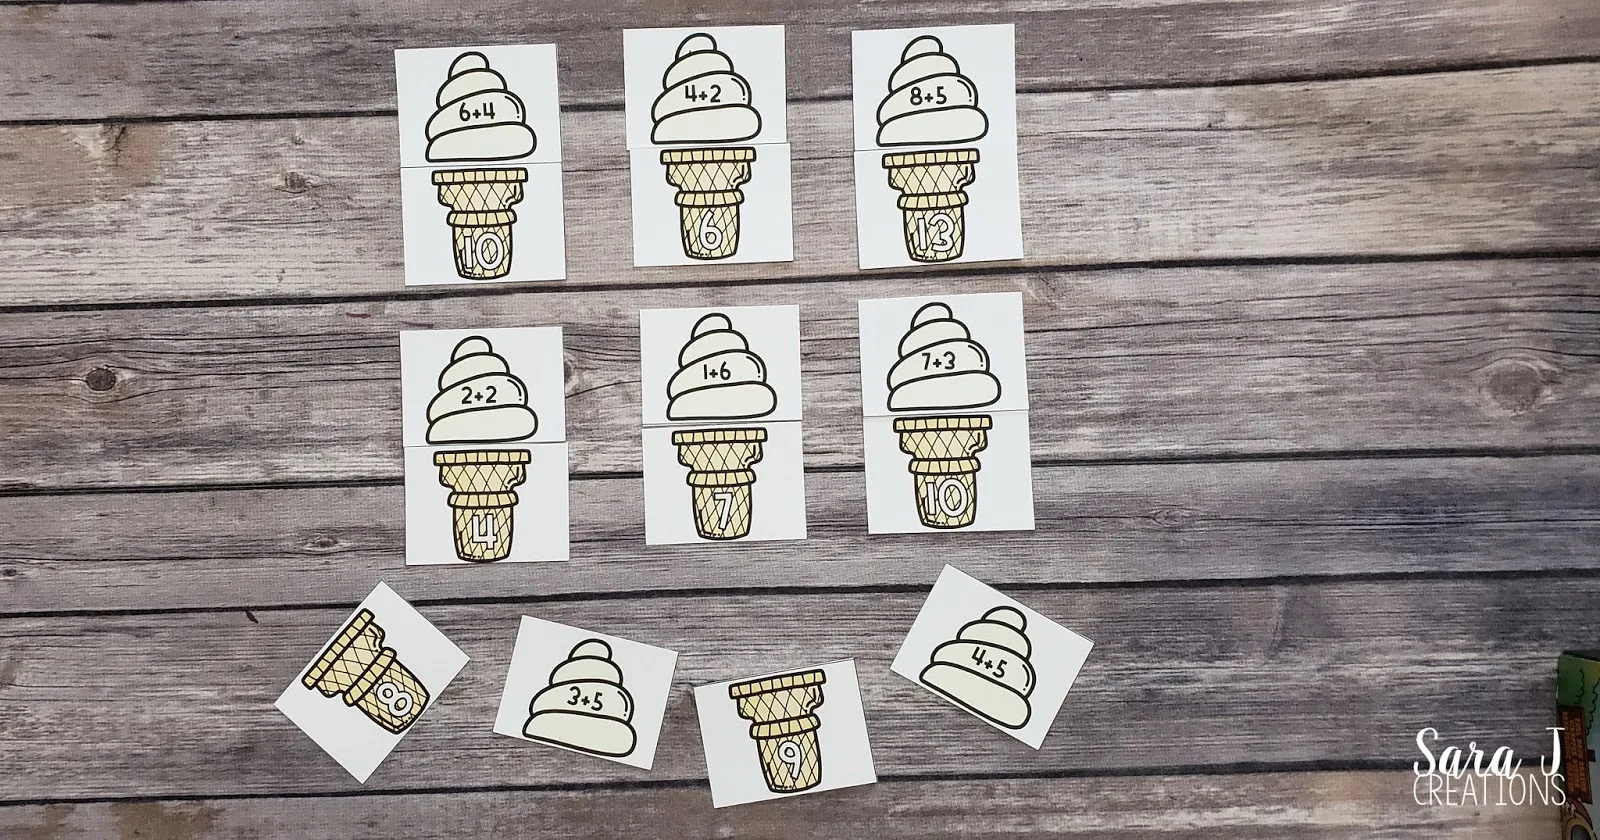 These free ice cream addition puzzles are perfect for helping your kindergartner or first grader practice their math facts.